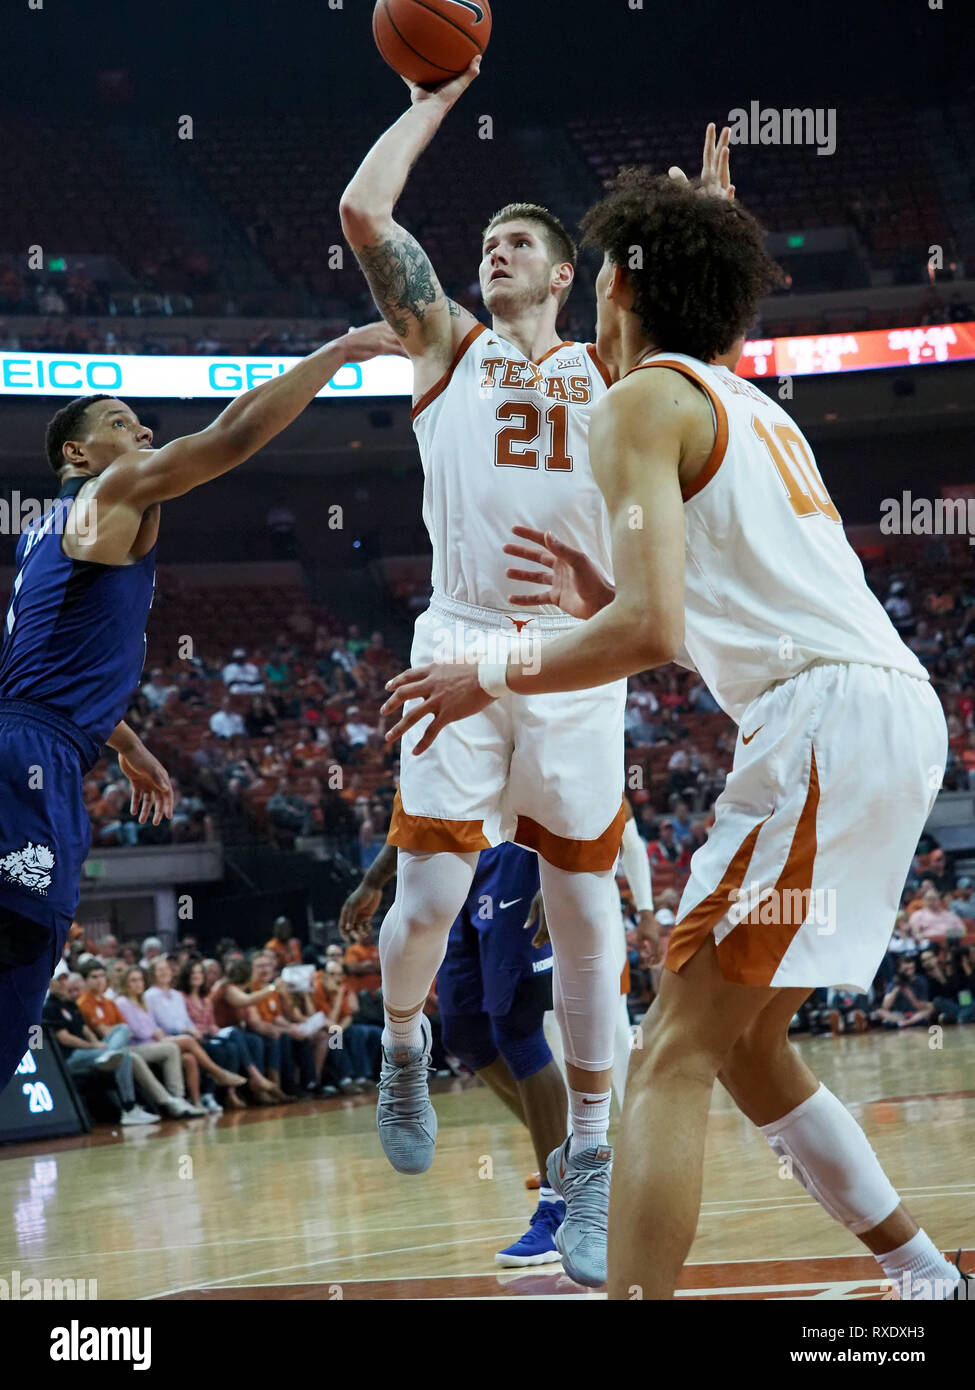 March 9, 2019. Dylan Osetkowski #21 of the Texas Longhorns in action vs the TCU Horned Frogs at the Frank Erwin Center in Austin Texas. TCU beats Texas 69-54.Robert Backman/Cal Sport Media. Stock Photo